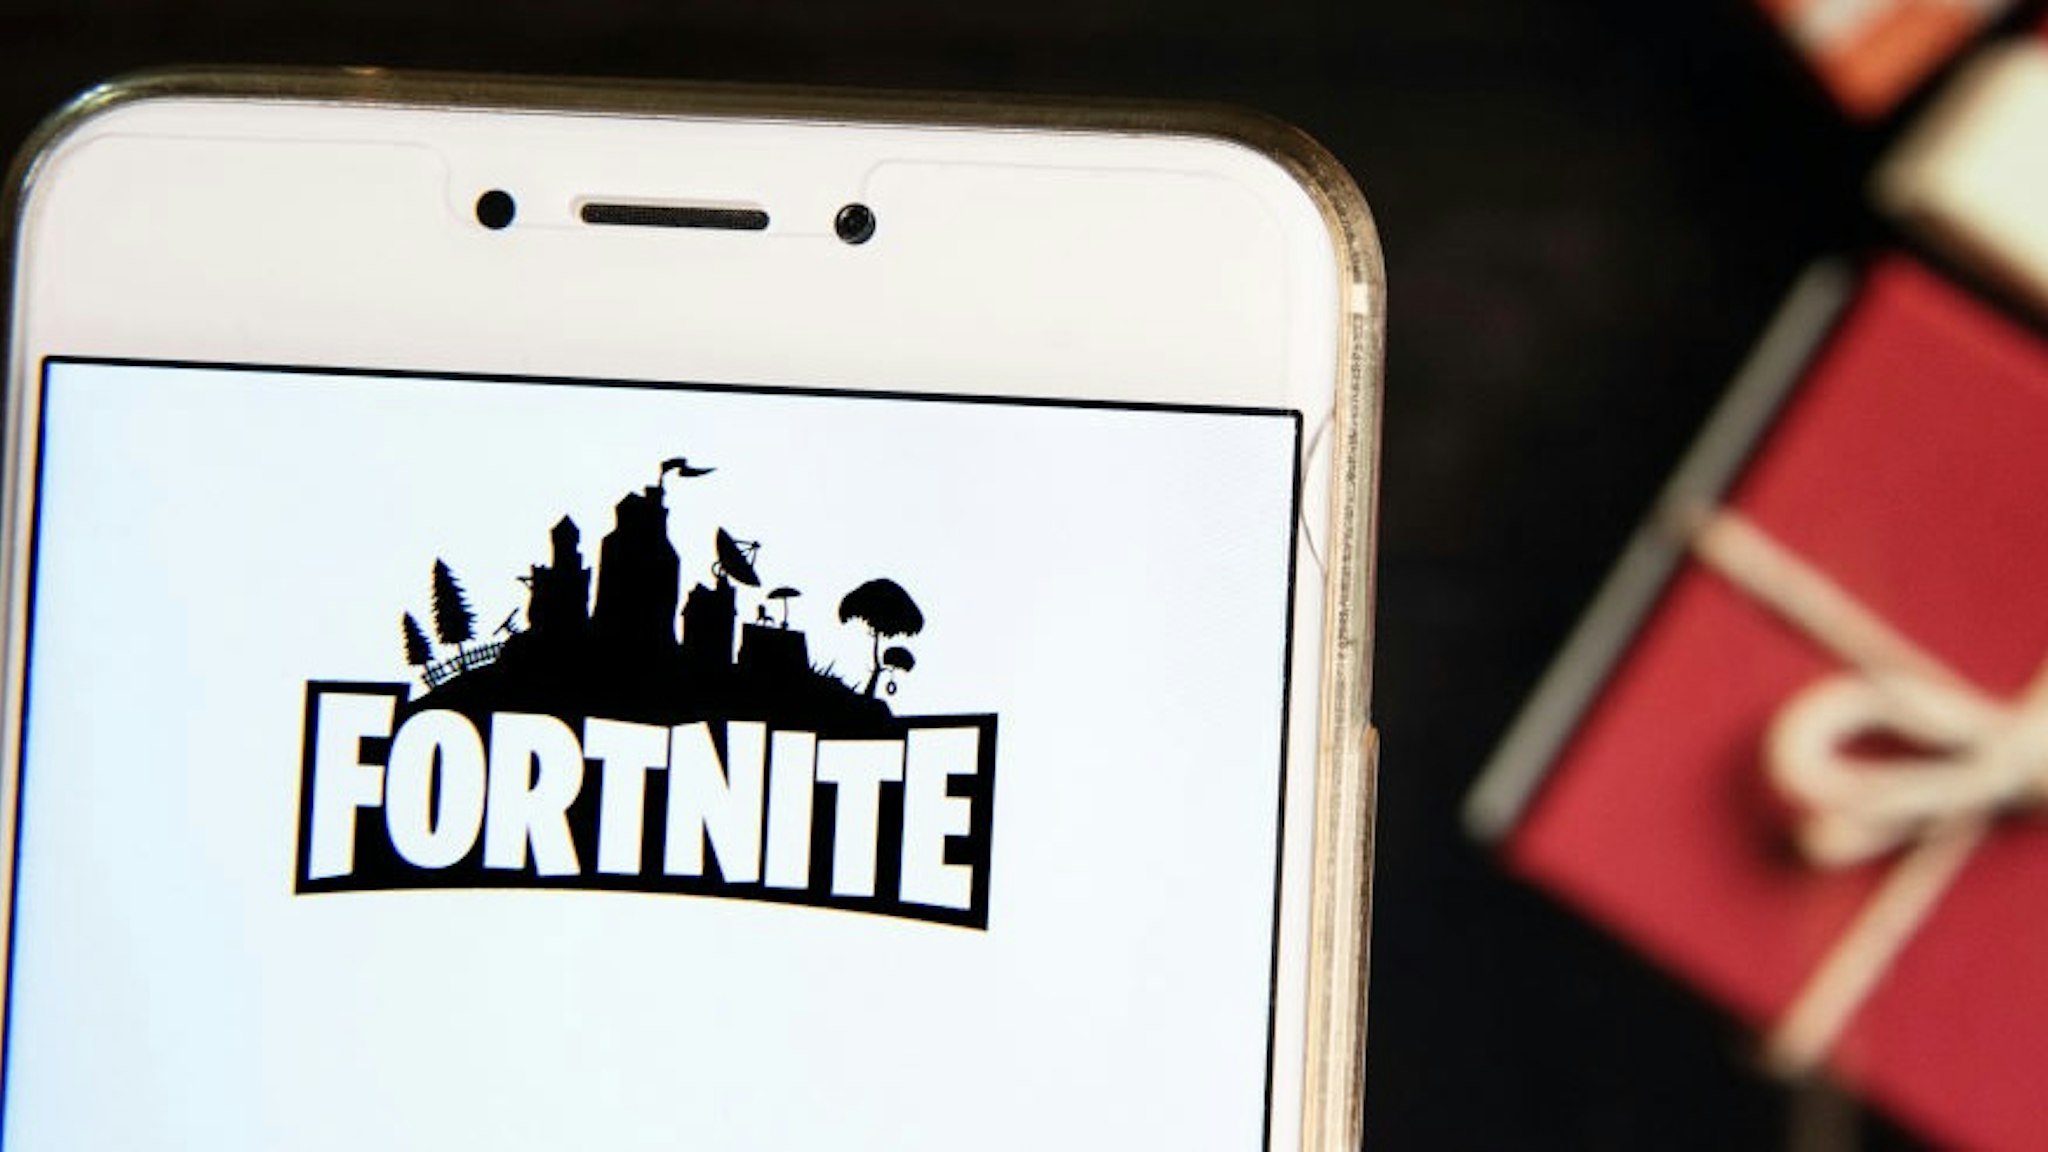 Online video game by Epic Games company Fortnite logo is HONG KONG - 2018/11/21: In this photo illustration, the Online video game by Epic Games company Fortnite logo is seen displayed on an Android mobile device with a Christmas wrapped gifts in the background. (Photo Illustration by Miguel Candela/SOPA Images/LightRocket via Getty Images) SOPA Images / Contributor